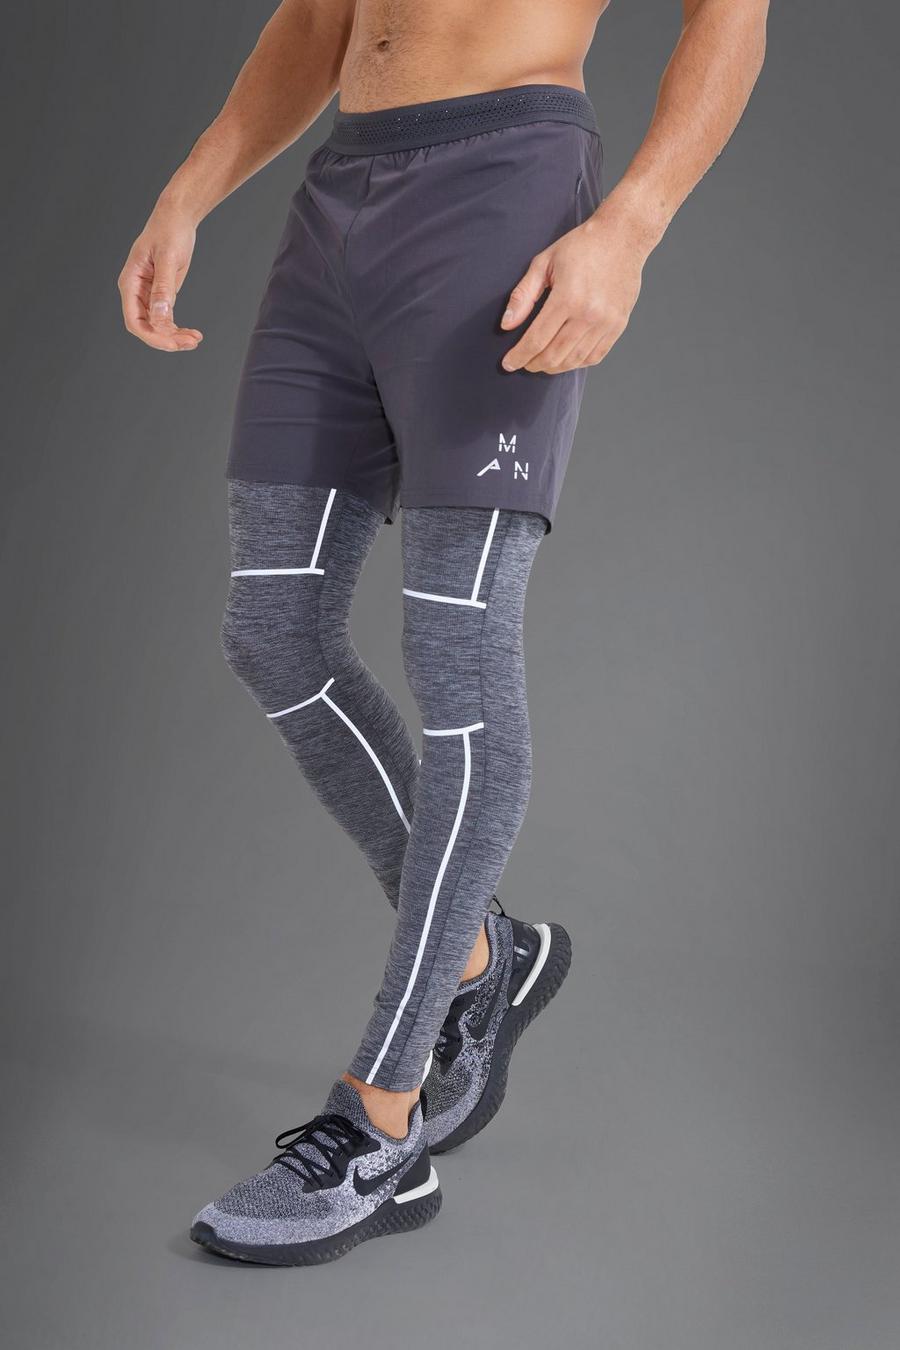 Charcoal grey Active Gym Reflective 2-In-1 Short Legging